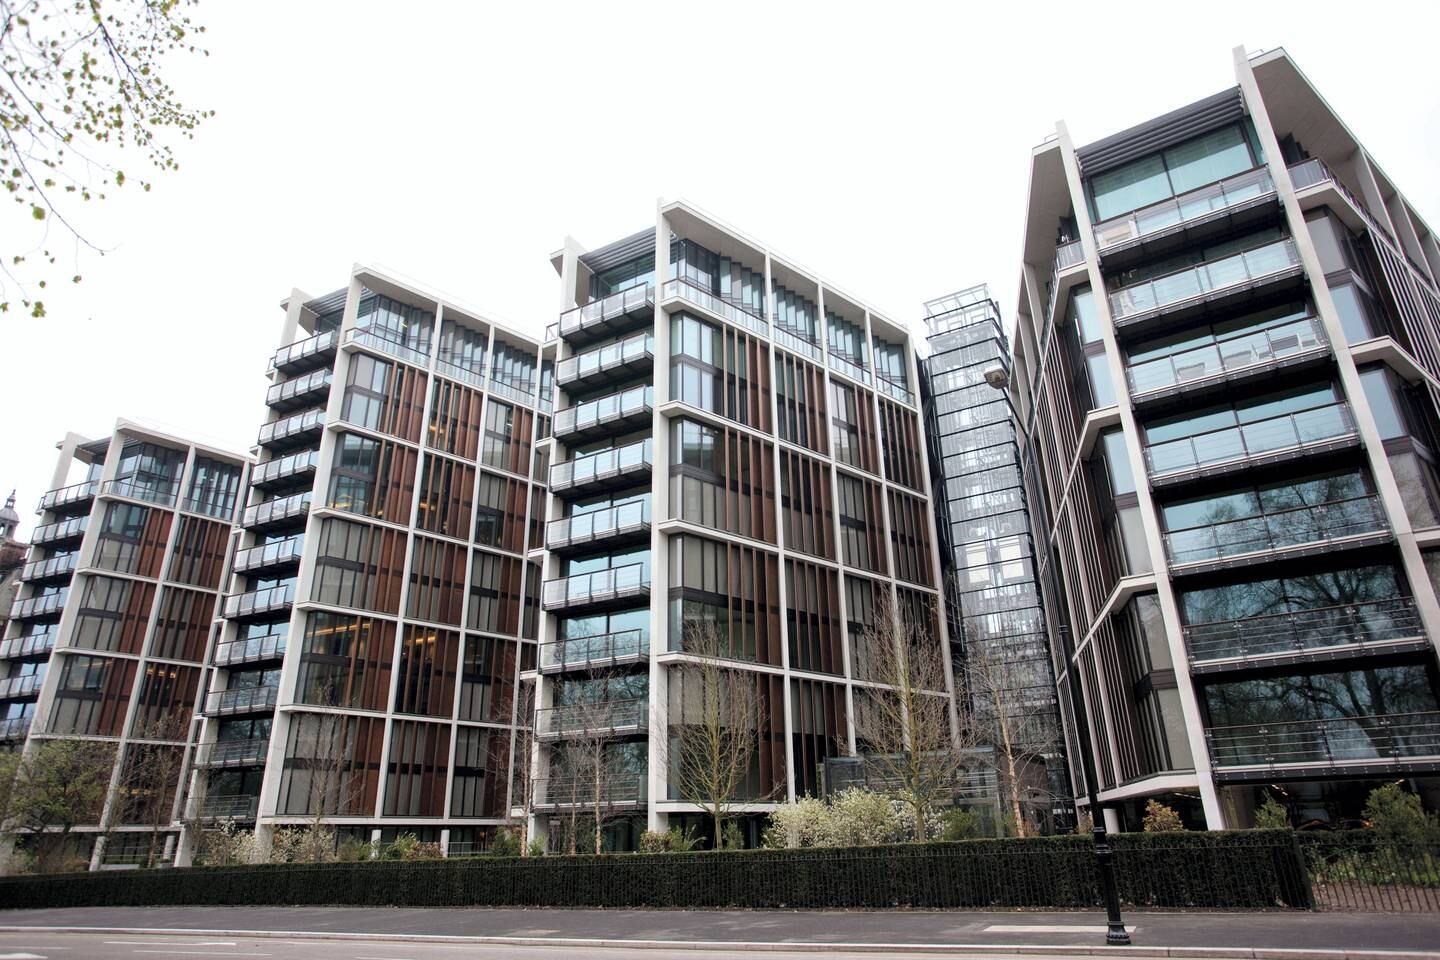 C3KRGA ONE HYDE PARK the most expensive luxury residential property in the world developed by Nicholas and Christian Candy.